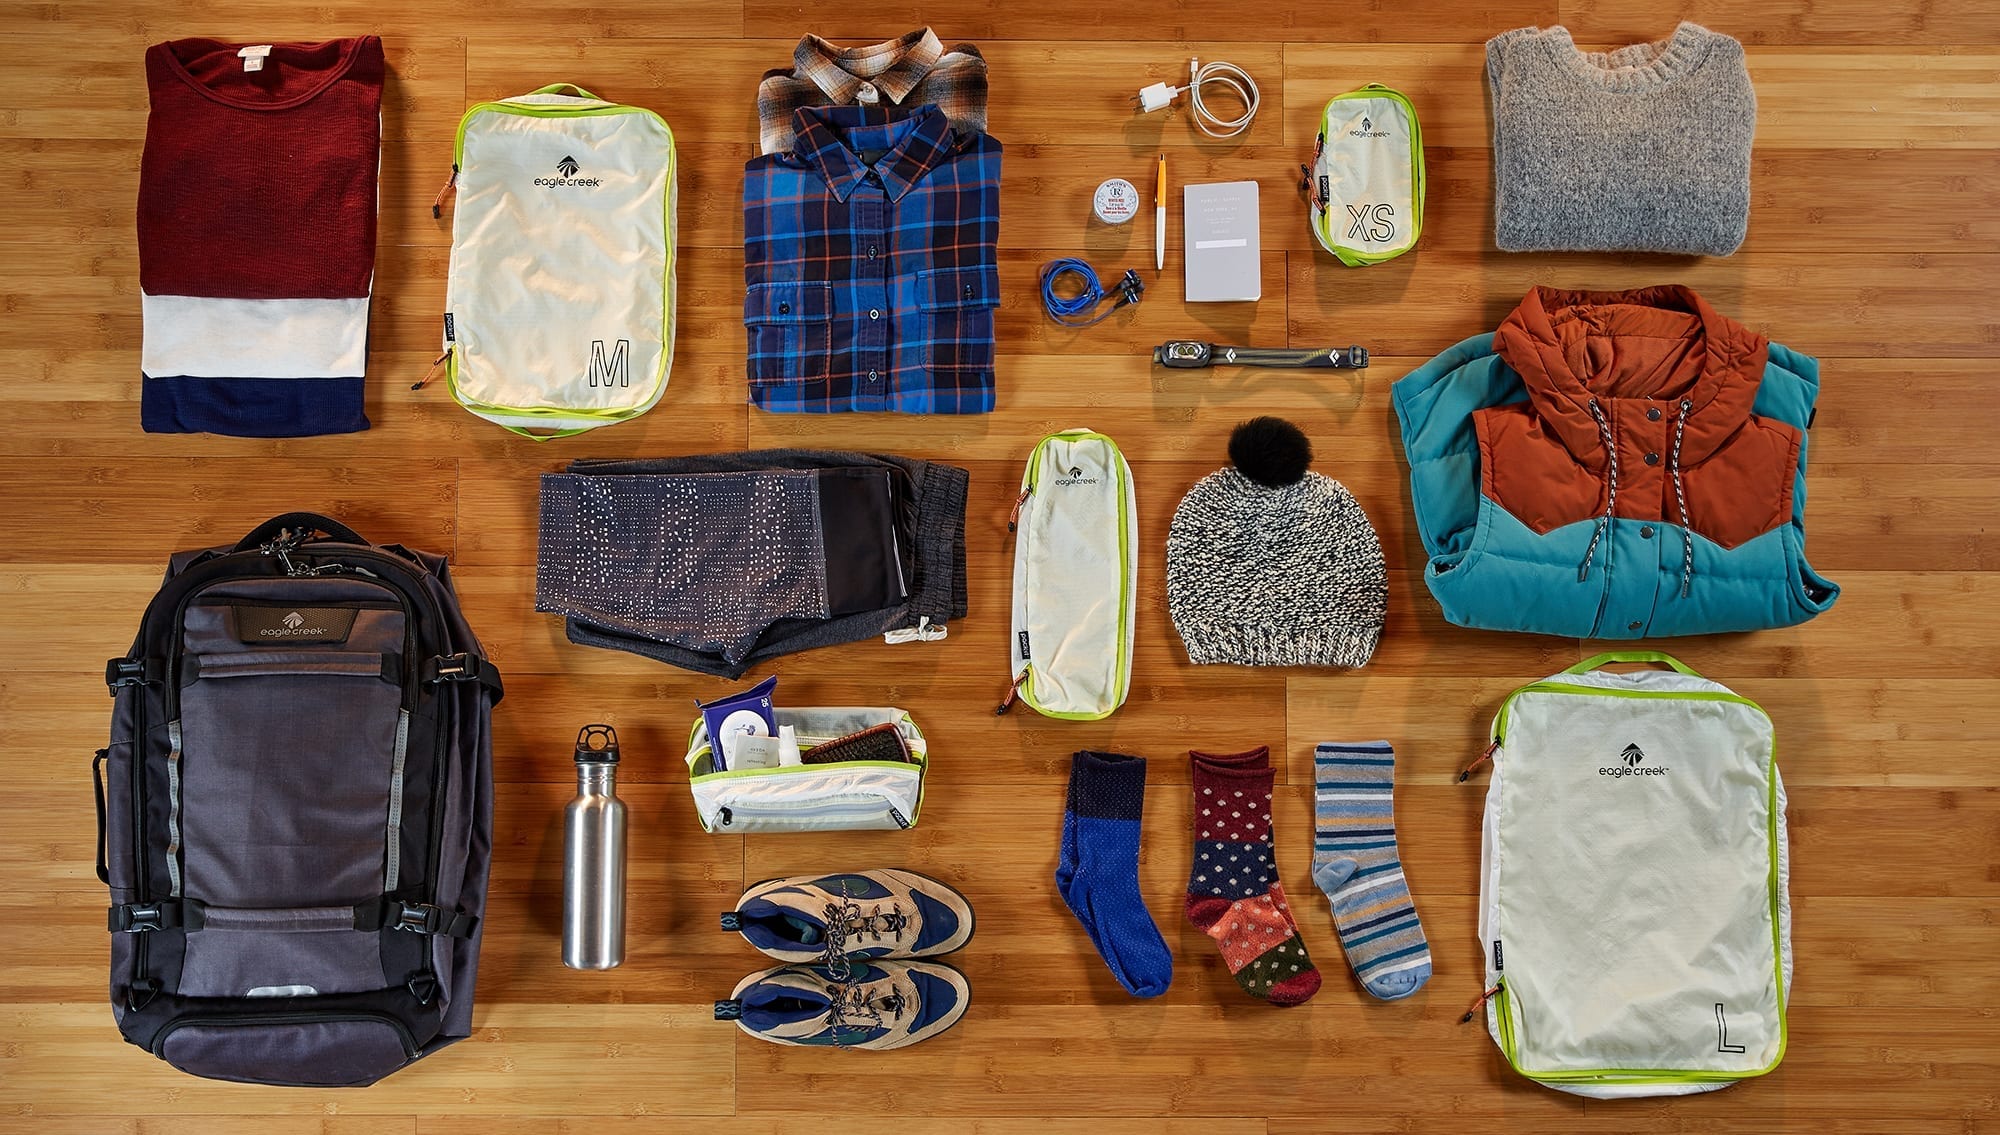 Thermisch Vermomd wijn The Ultimate Digital Nomad Packing Guide - Andy Sto